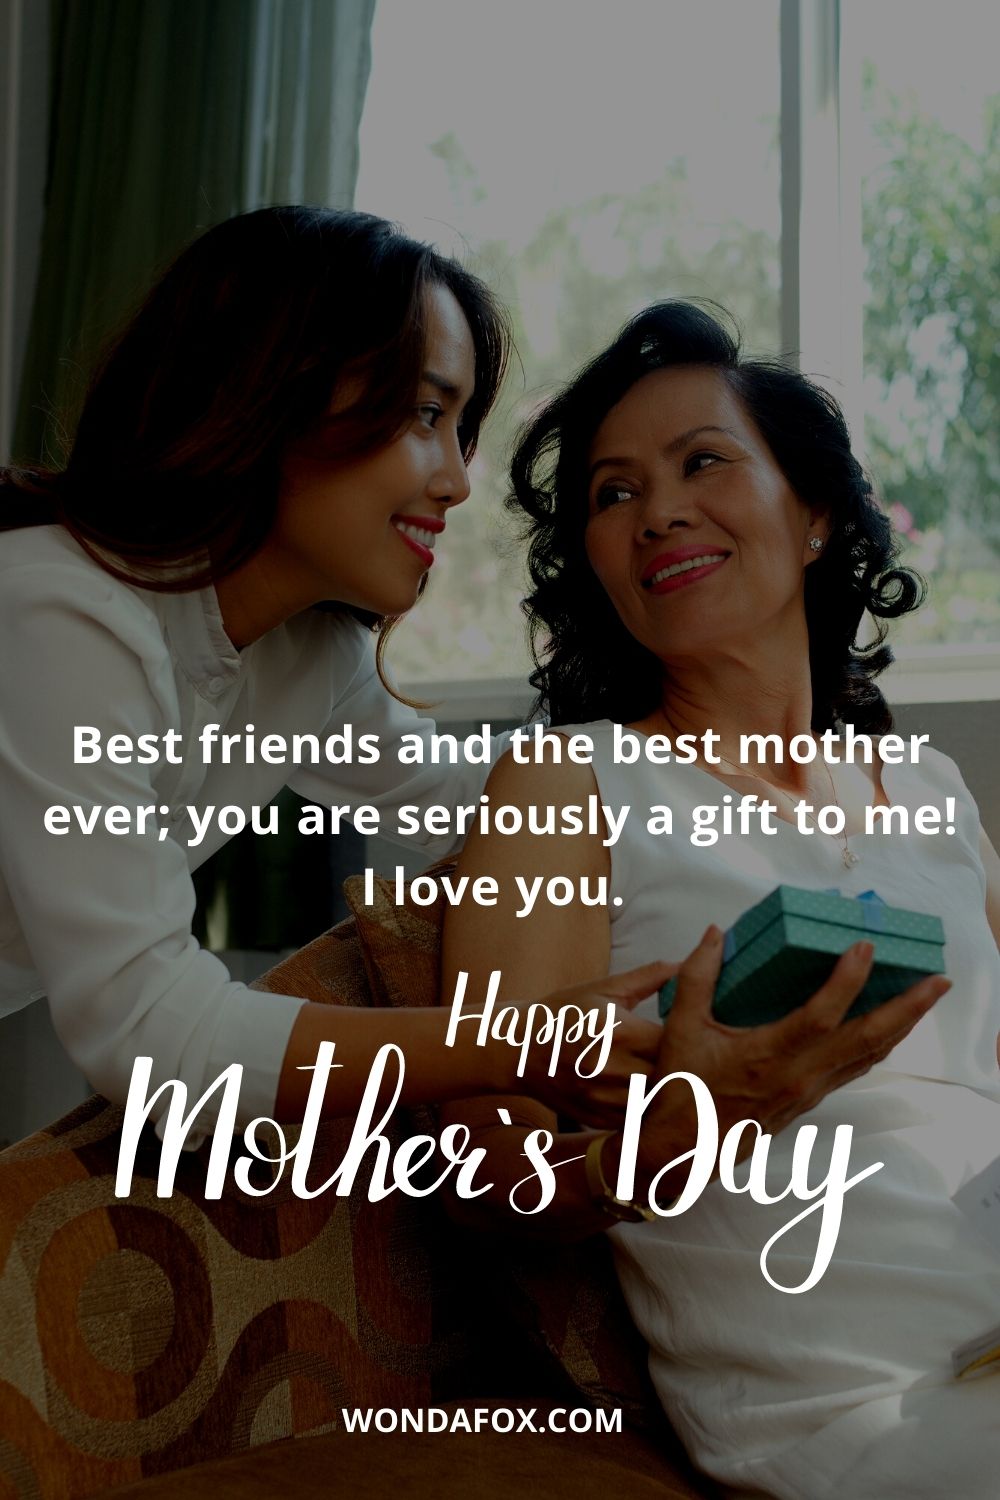 Best friends and the best mother ever; you are seriously a gift to me! I love you. Happy Mother’s day!